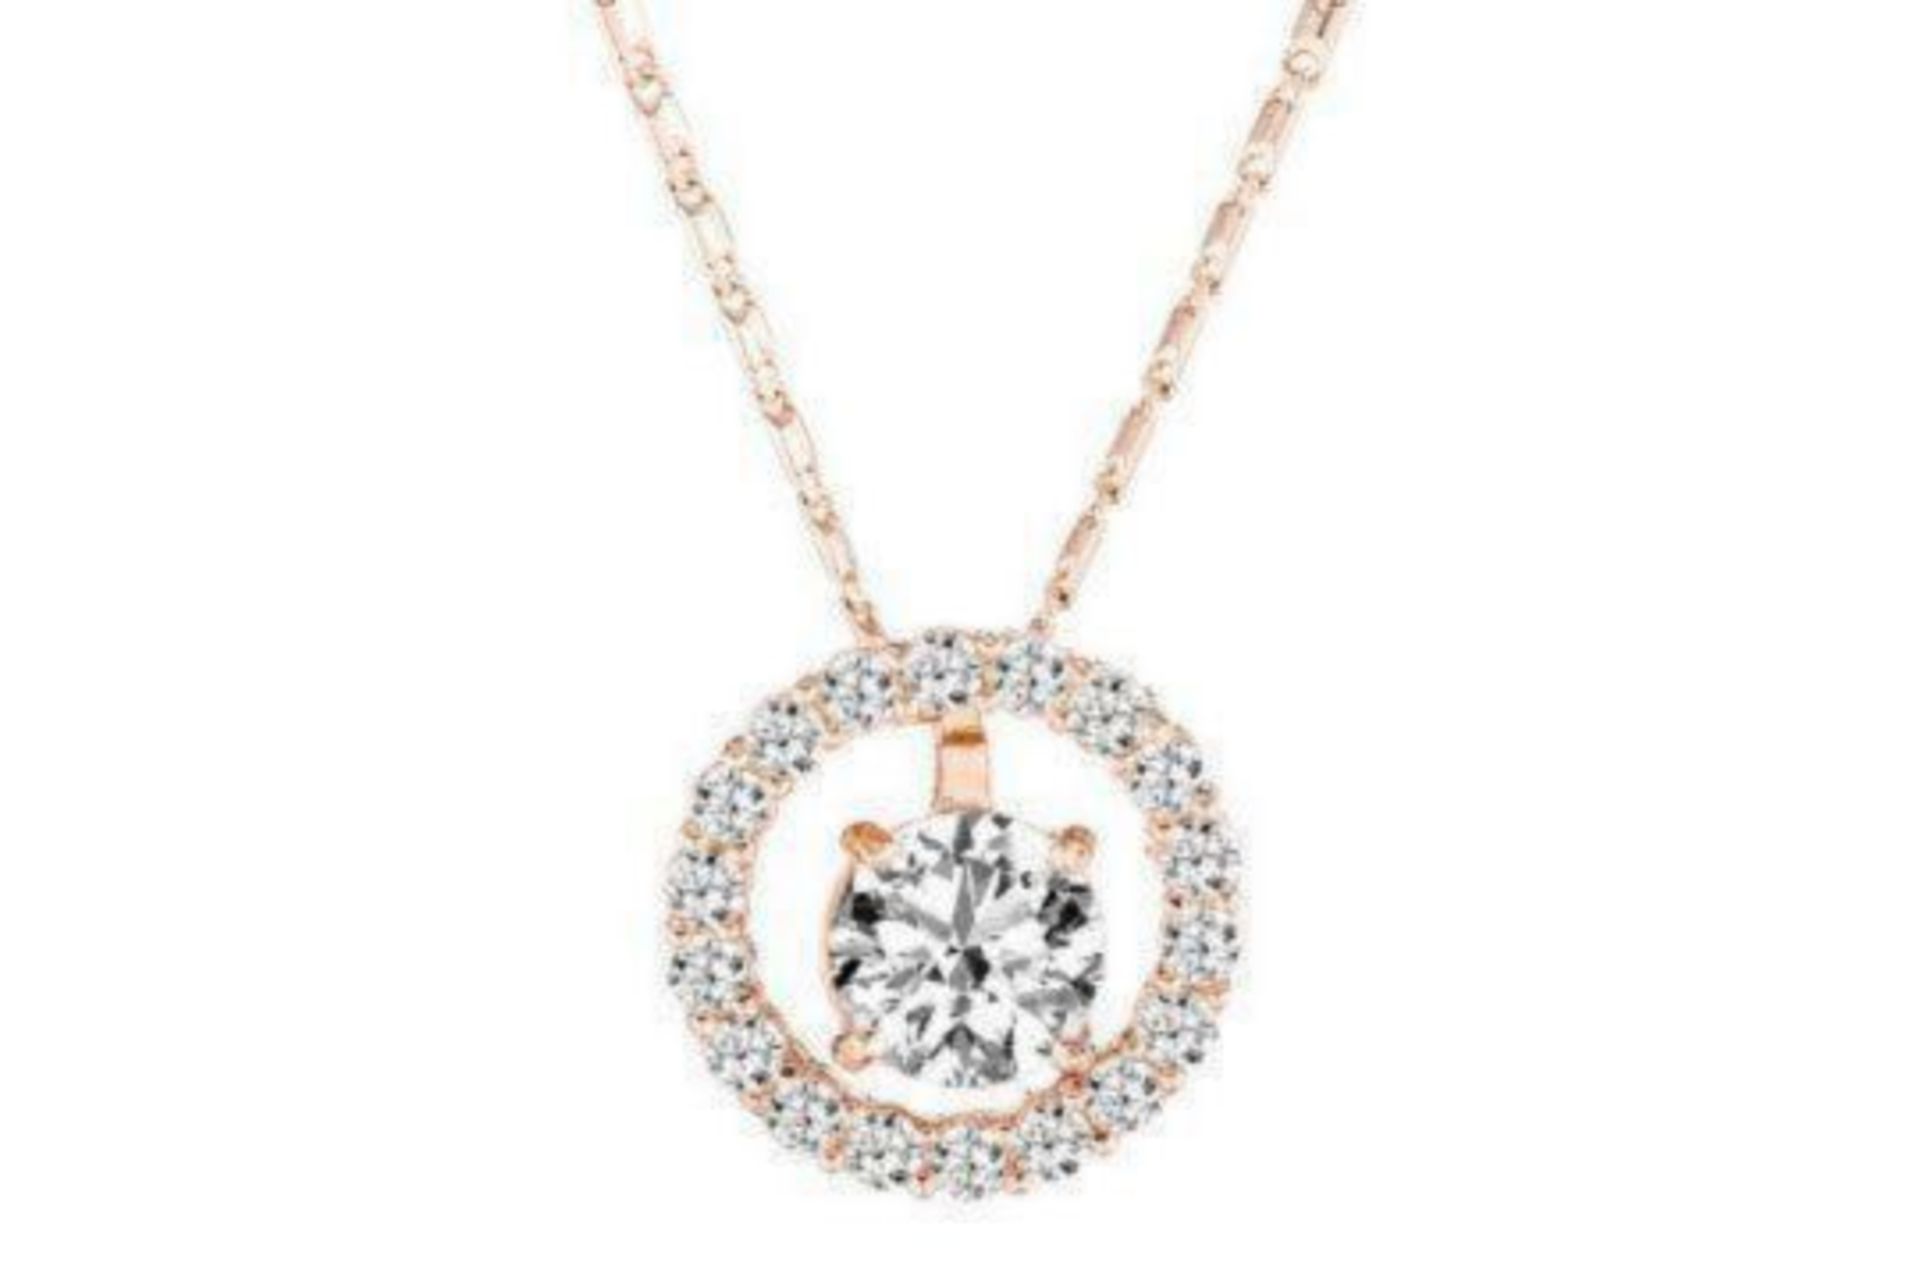 5 X BRAND NEW DIAMONDSTYLE LONDON SOLSTICE PENDANT IN ROSE GOLD WITH CERTIFICATION OF AUTHENTICITY